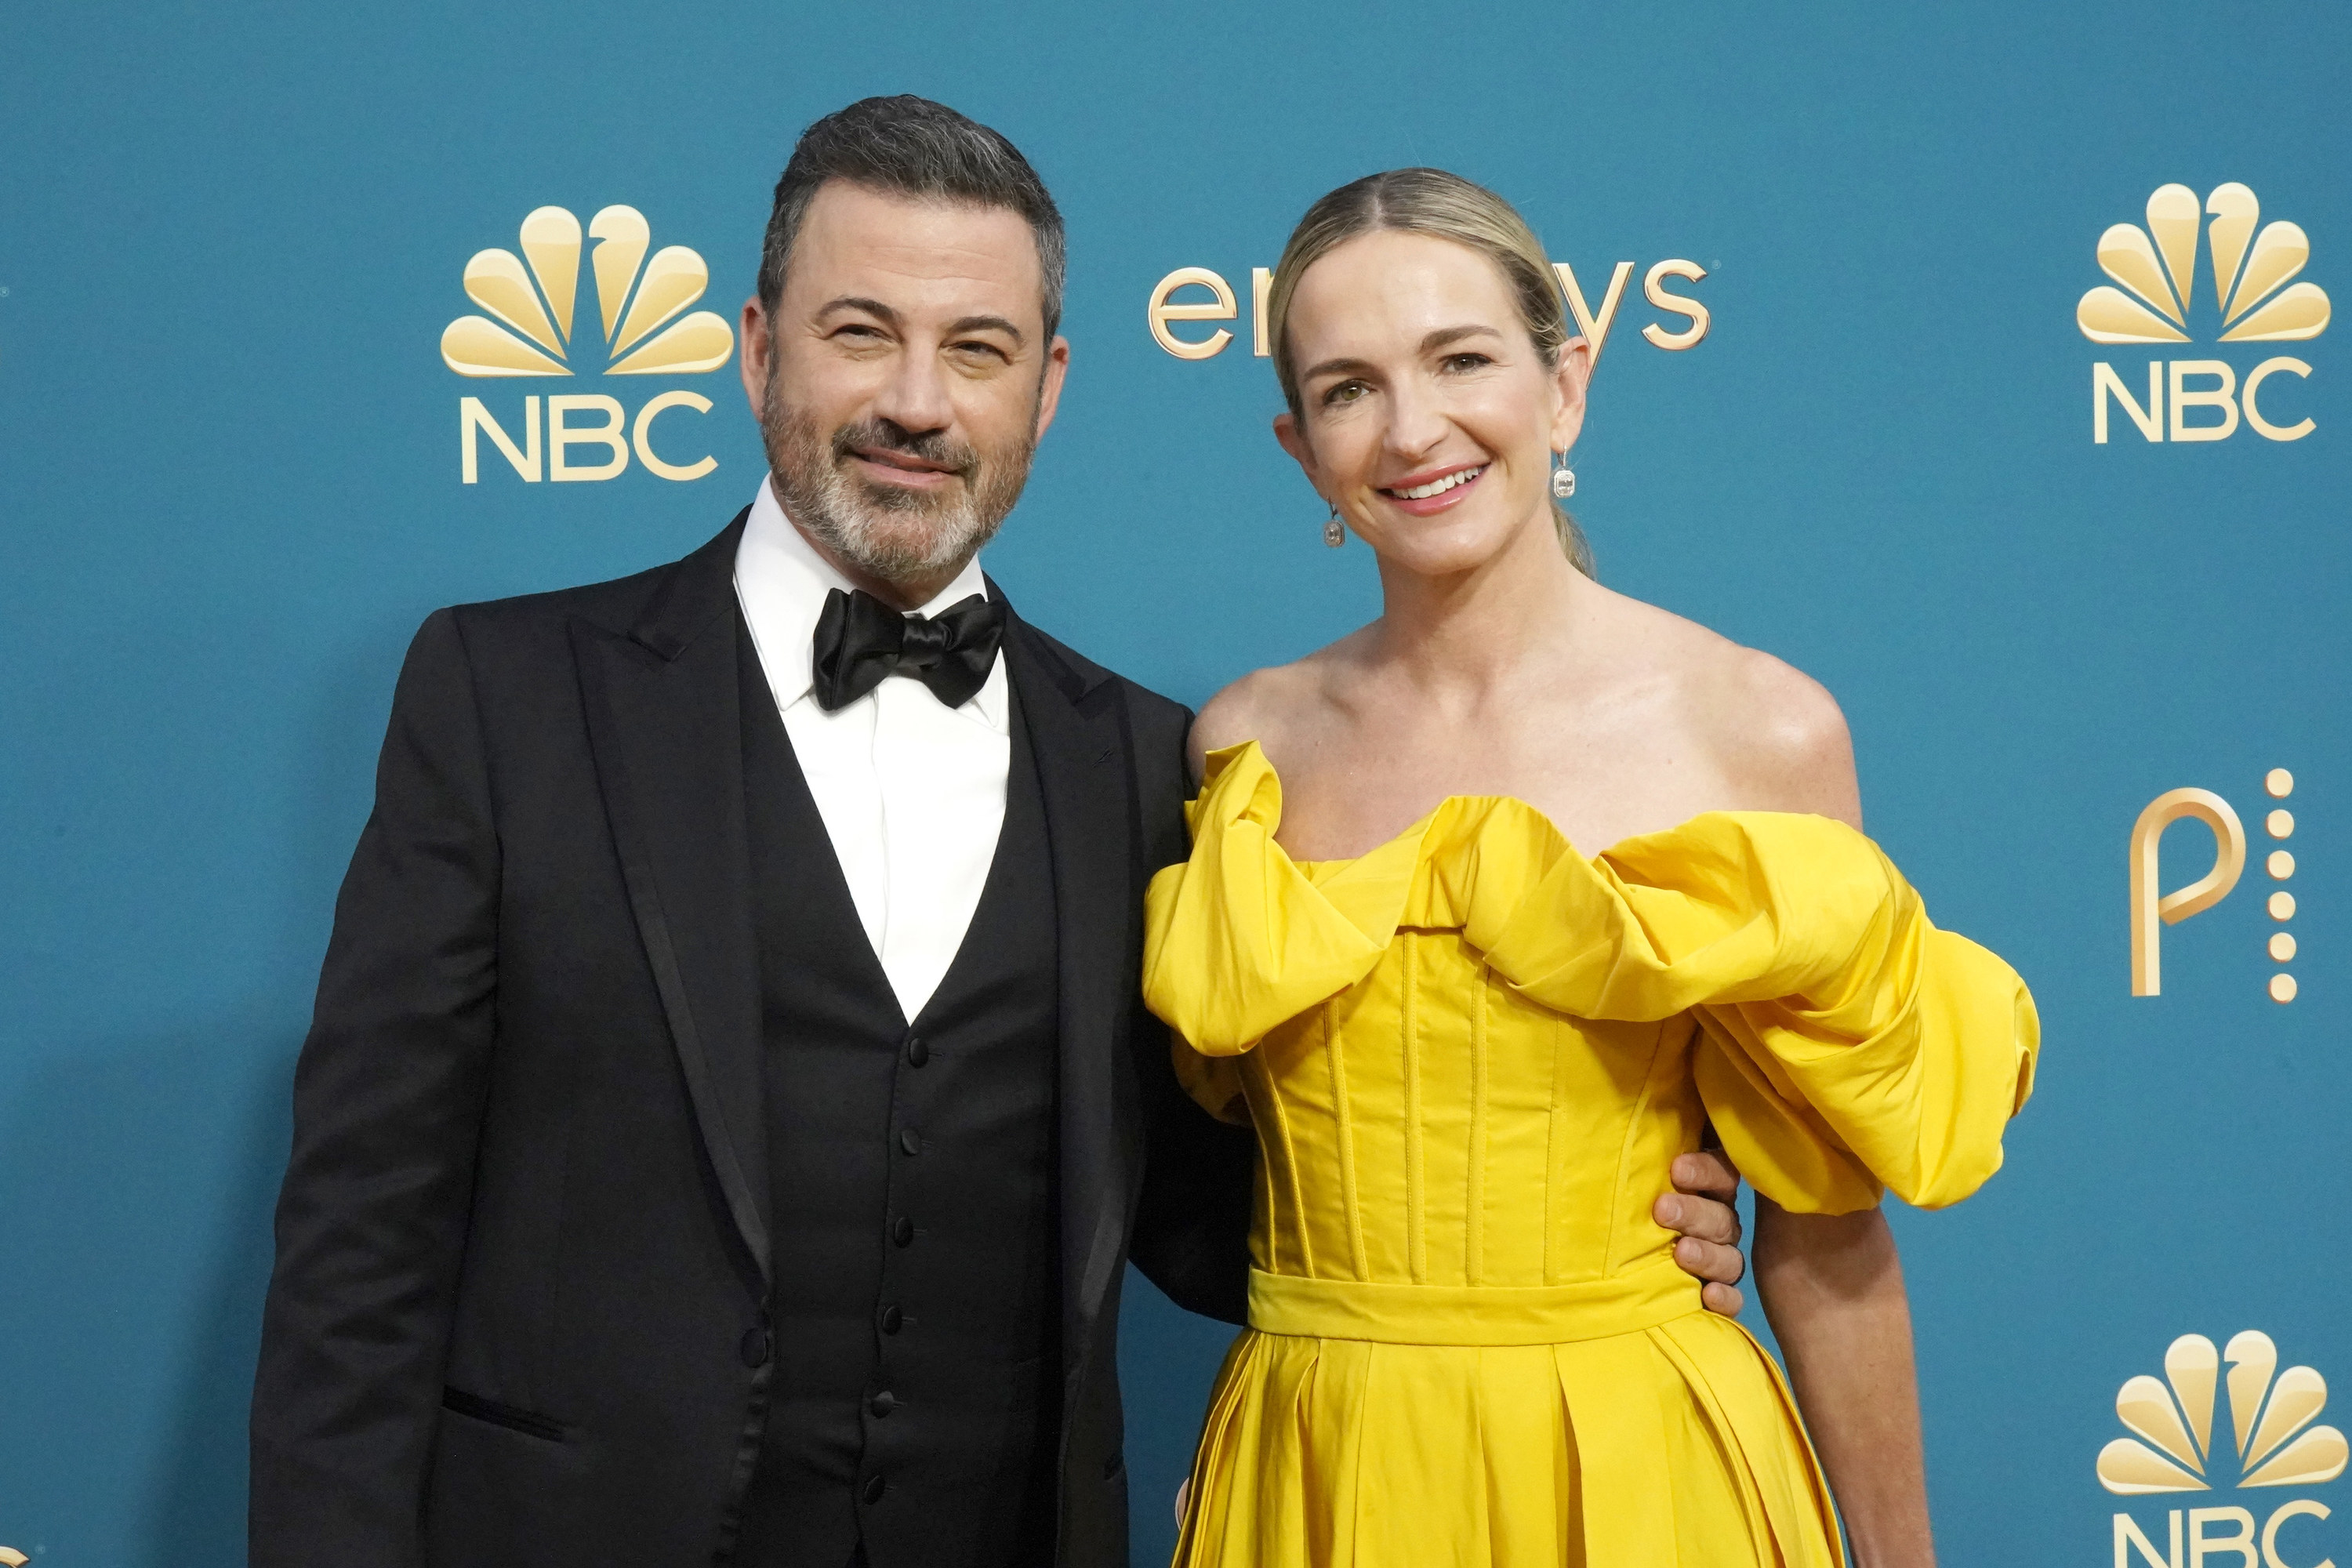 Jimmy Kimmel in a black tux and Molly McNearney in a yellow strapless gown